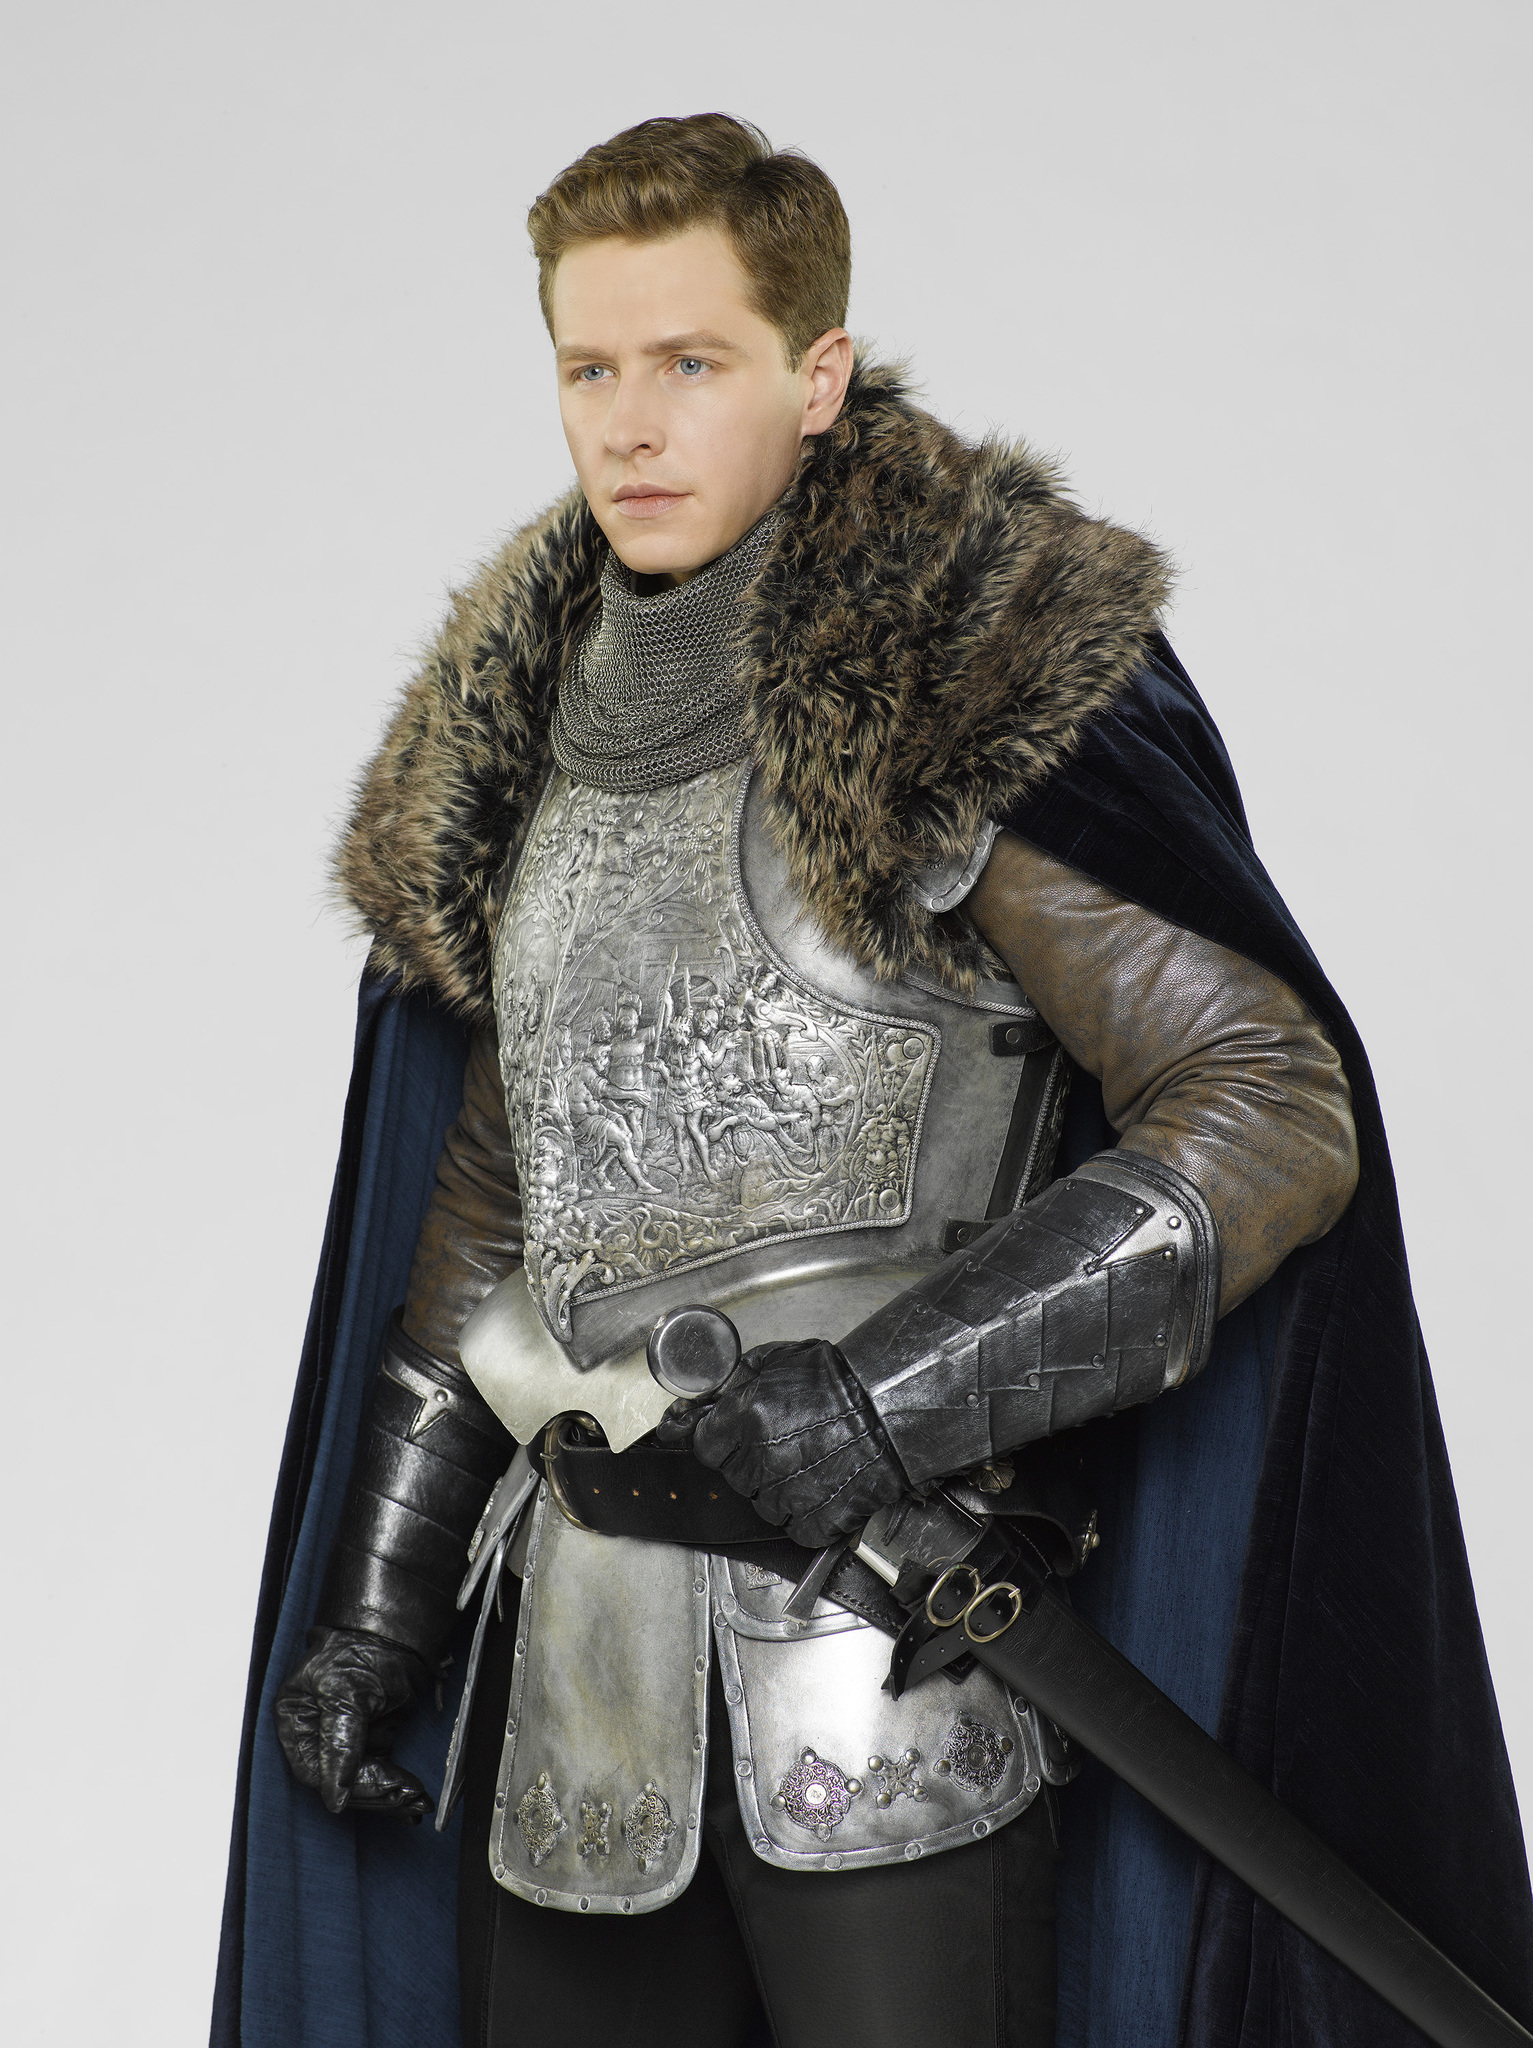 Still of Josh Dallas in Once Upon a Time (2011)